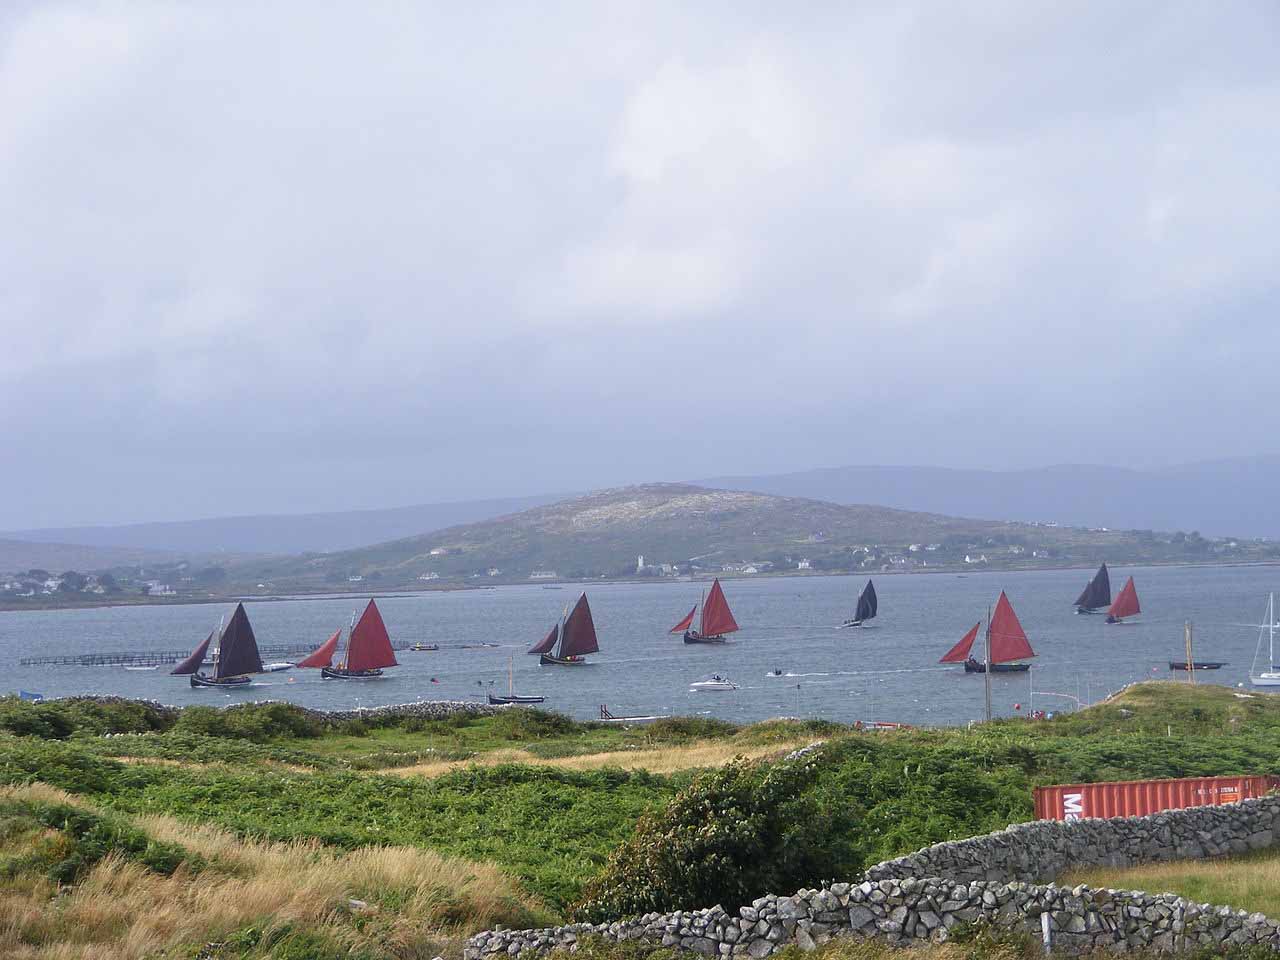 Sailing ships racing off the coast of Galway